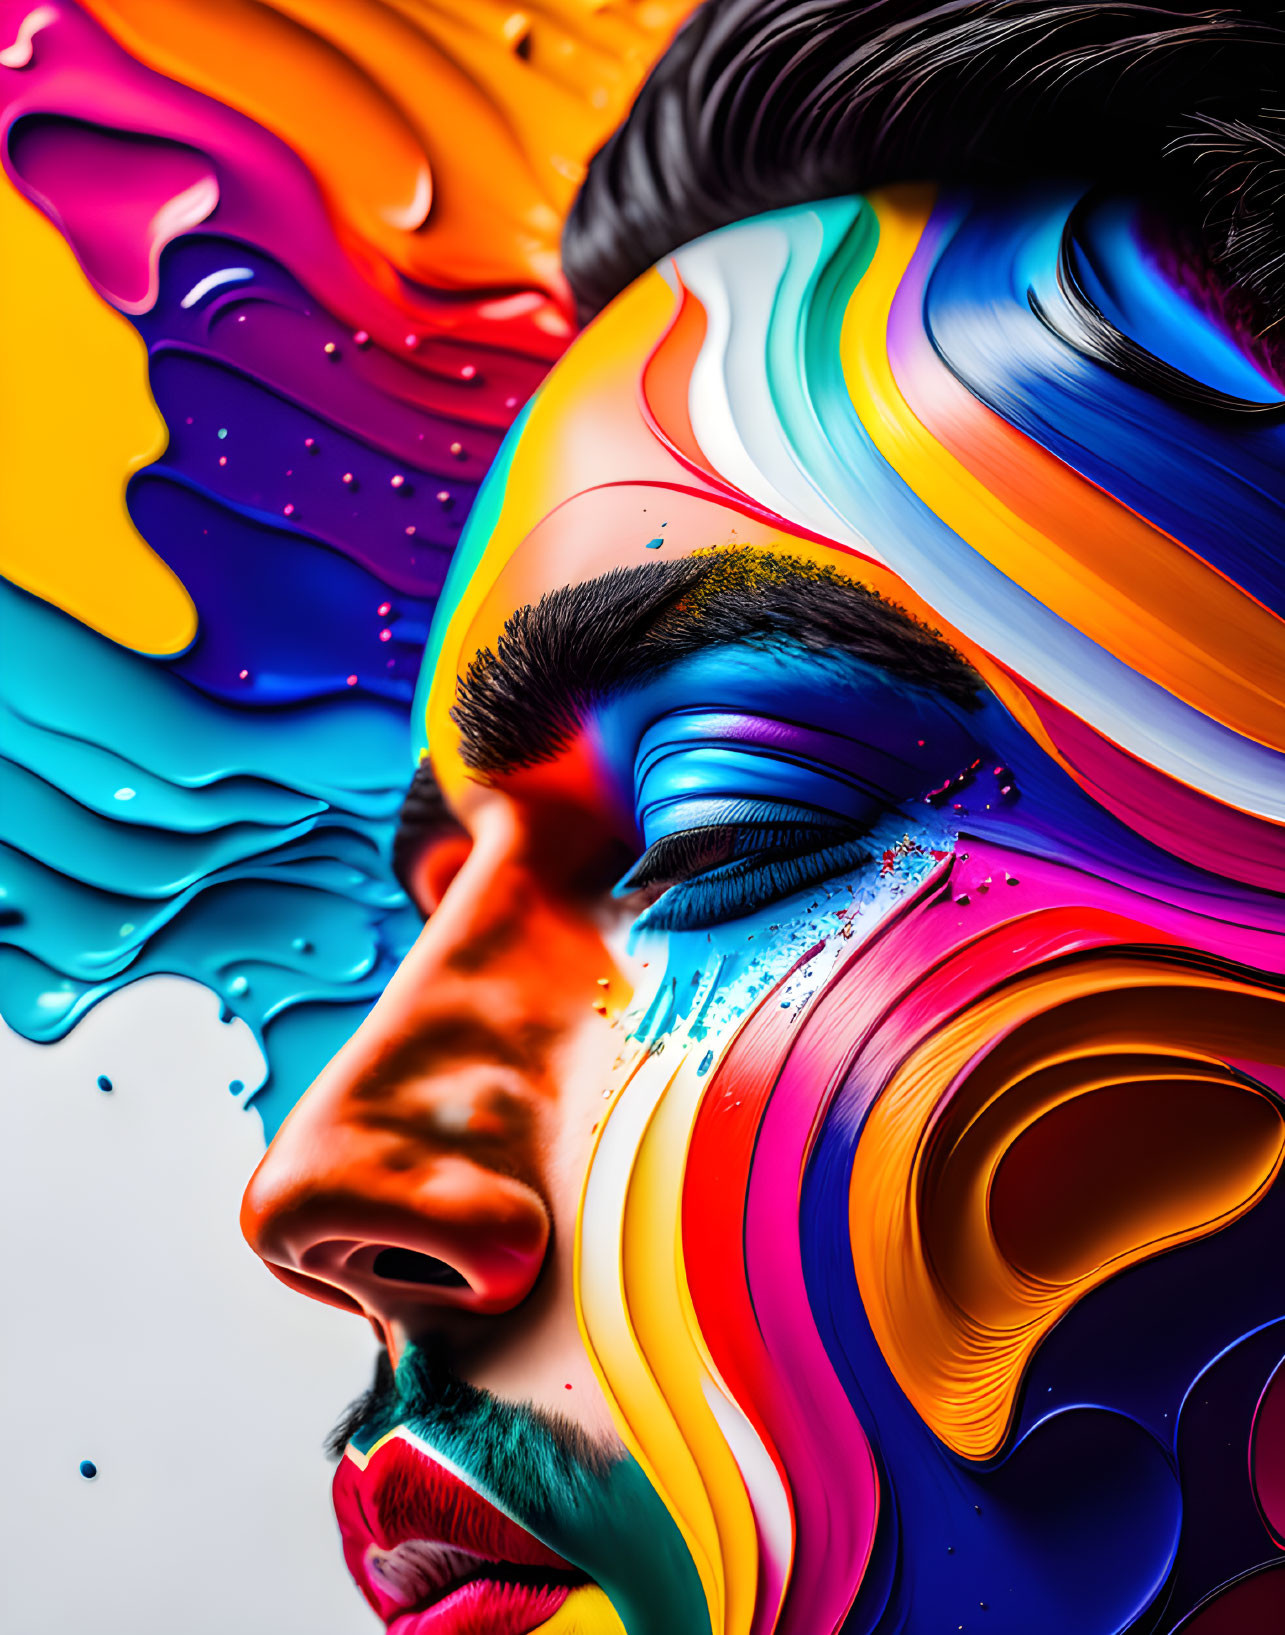 Colorful Digital Artwork: Profile of Face with Abstract Shapes